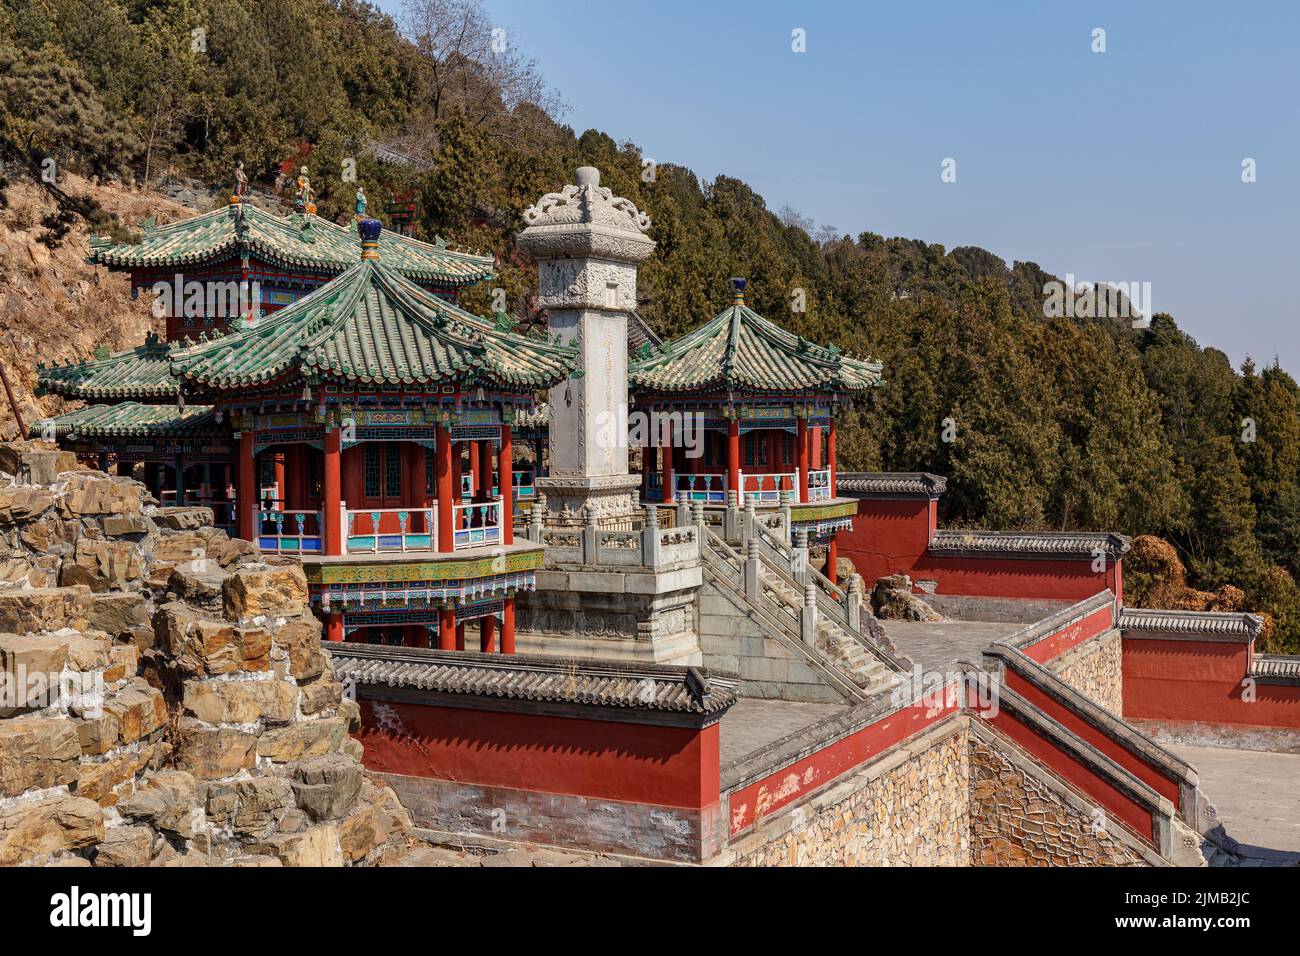 Hillside monastery complex at the Summer Palace in Beijing, China on March 15, 2018. Stock Photo